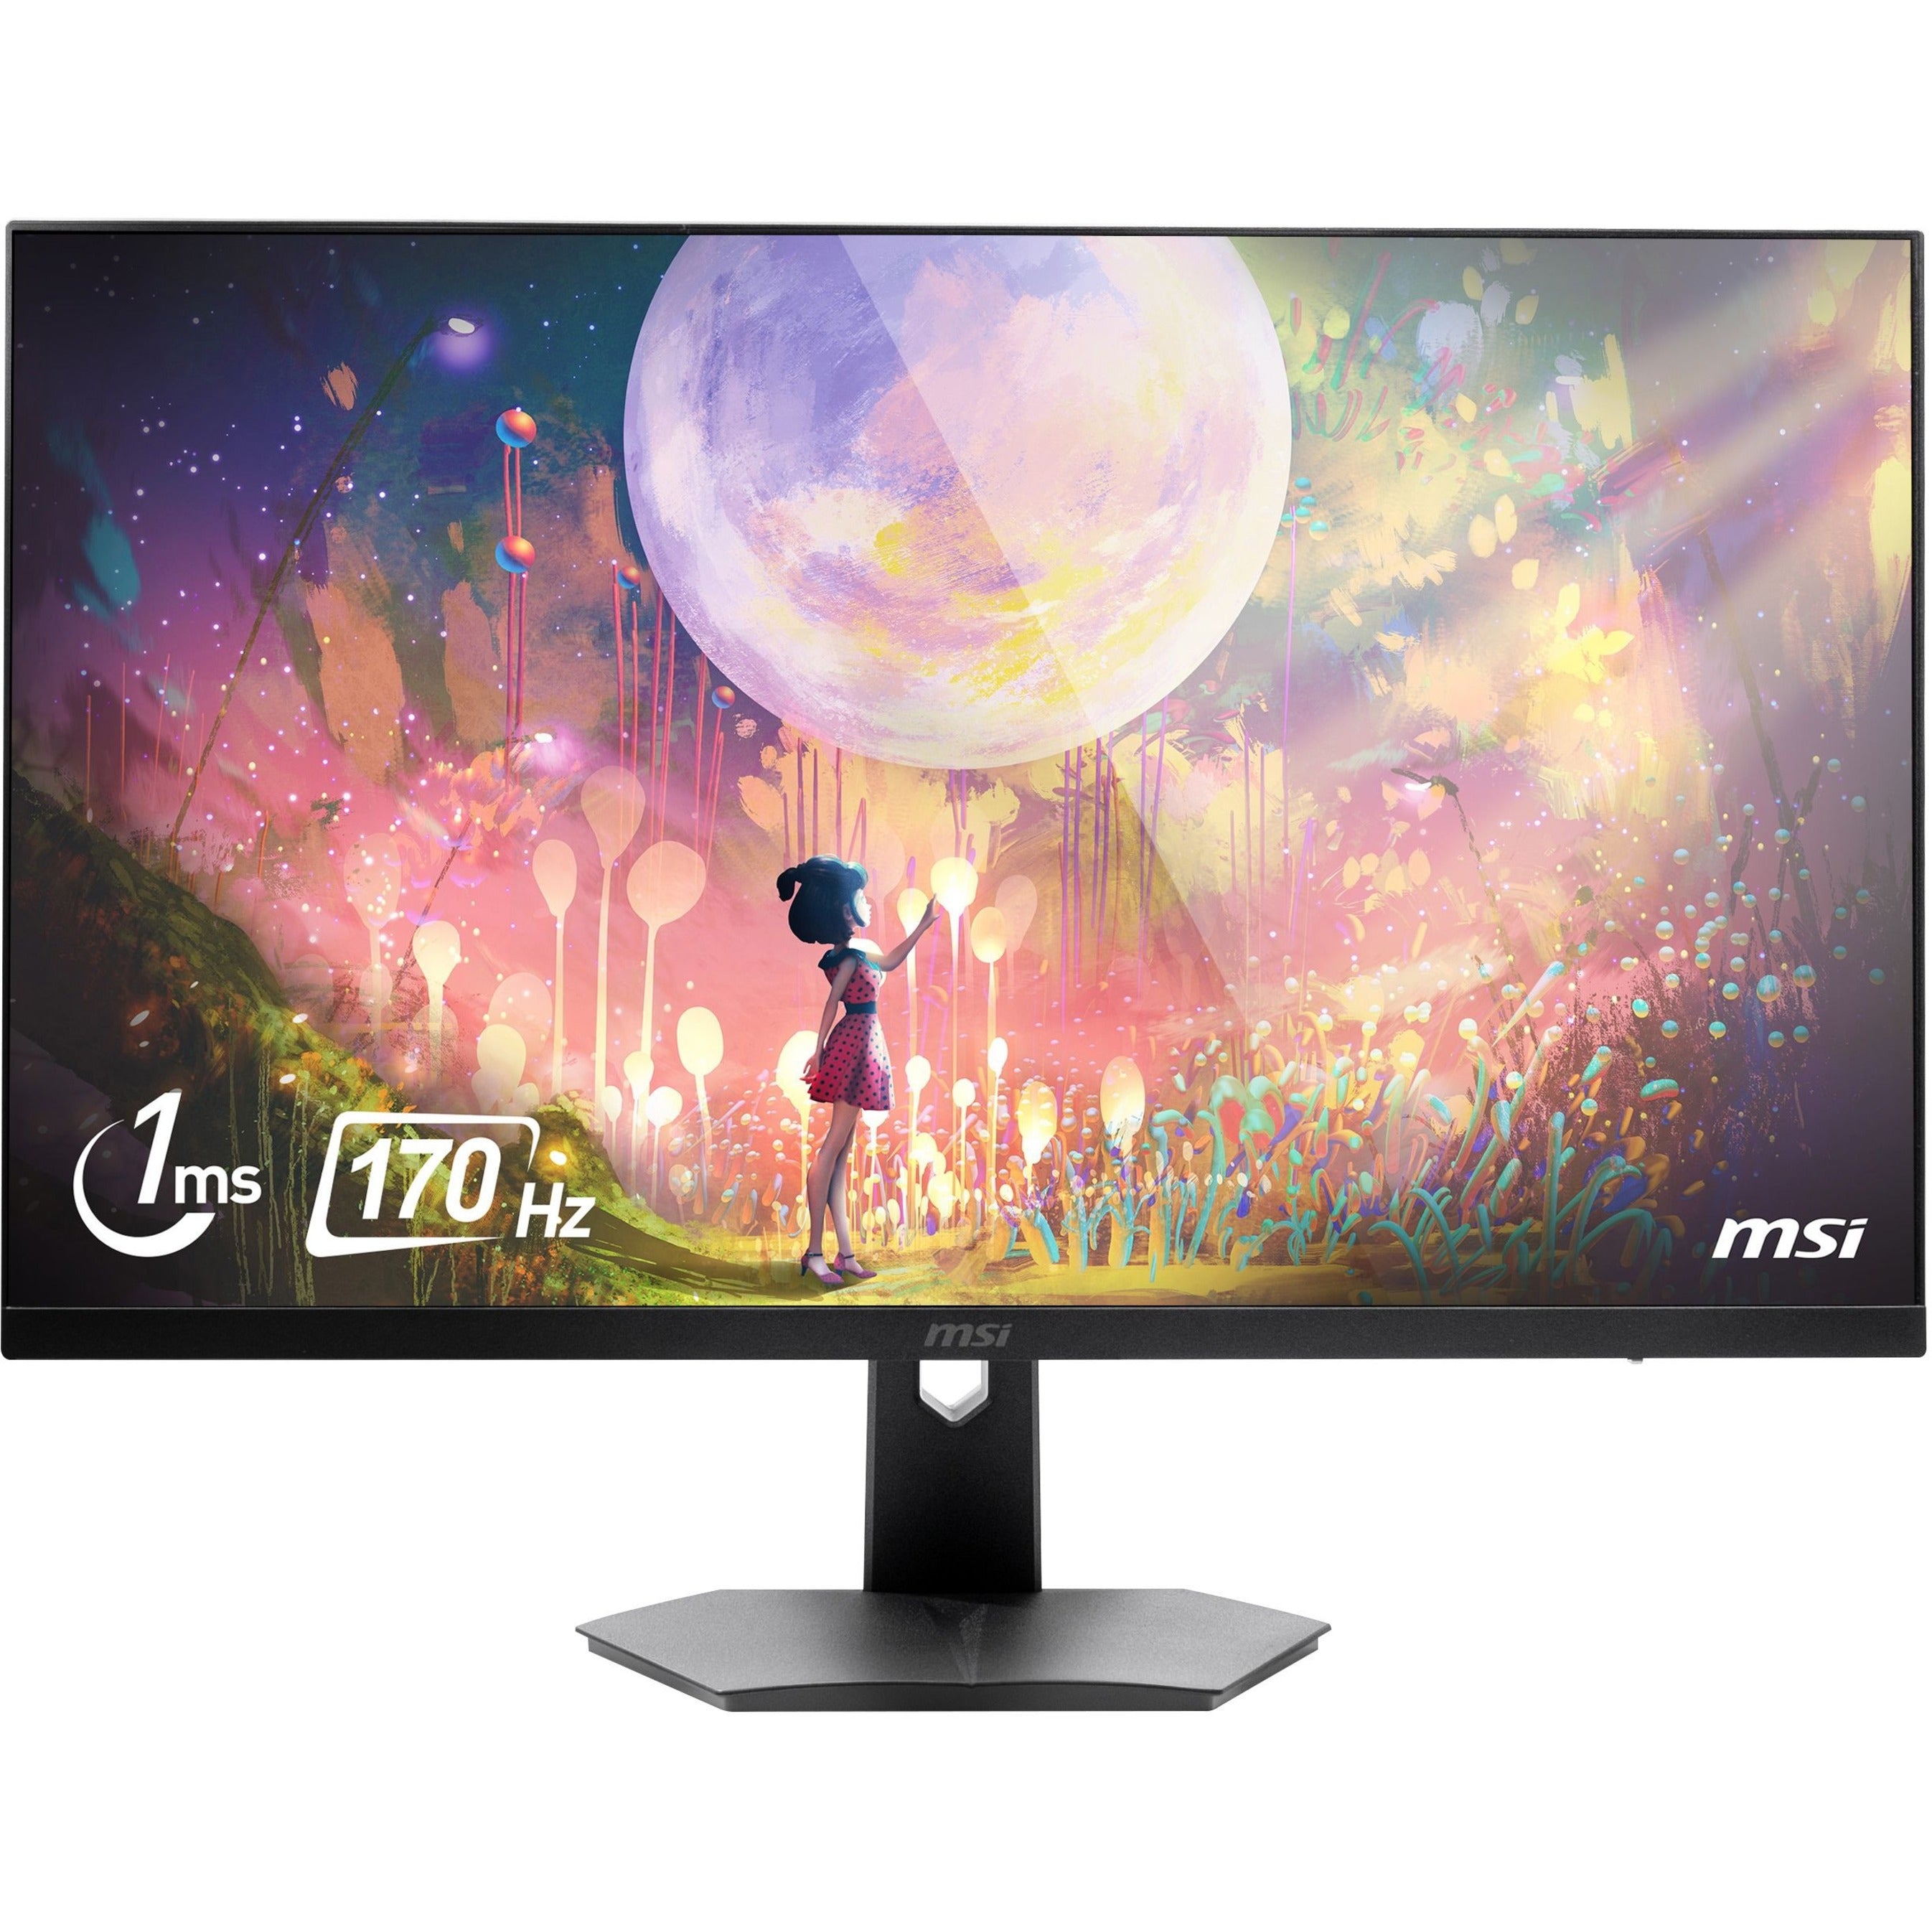 MSI OPTIXG274 Optix G274 27 Full HD Gaming LCD Monitor, 1ms Response Time, G-Sync Compatible, Wide Color Gamut